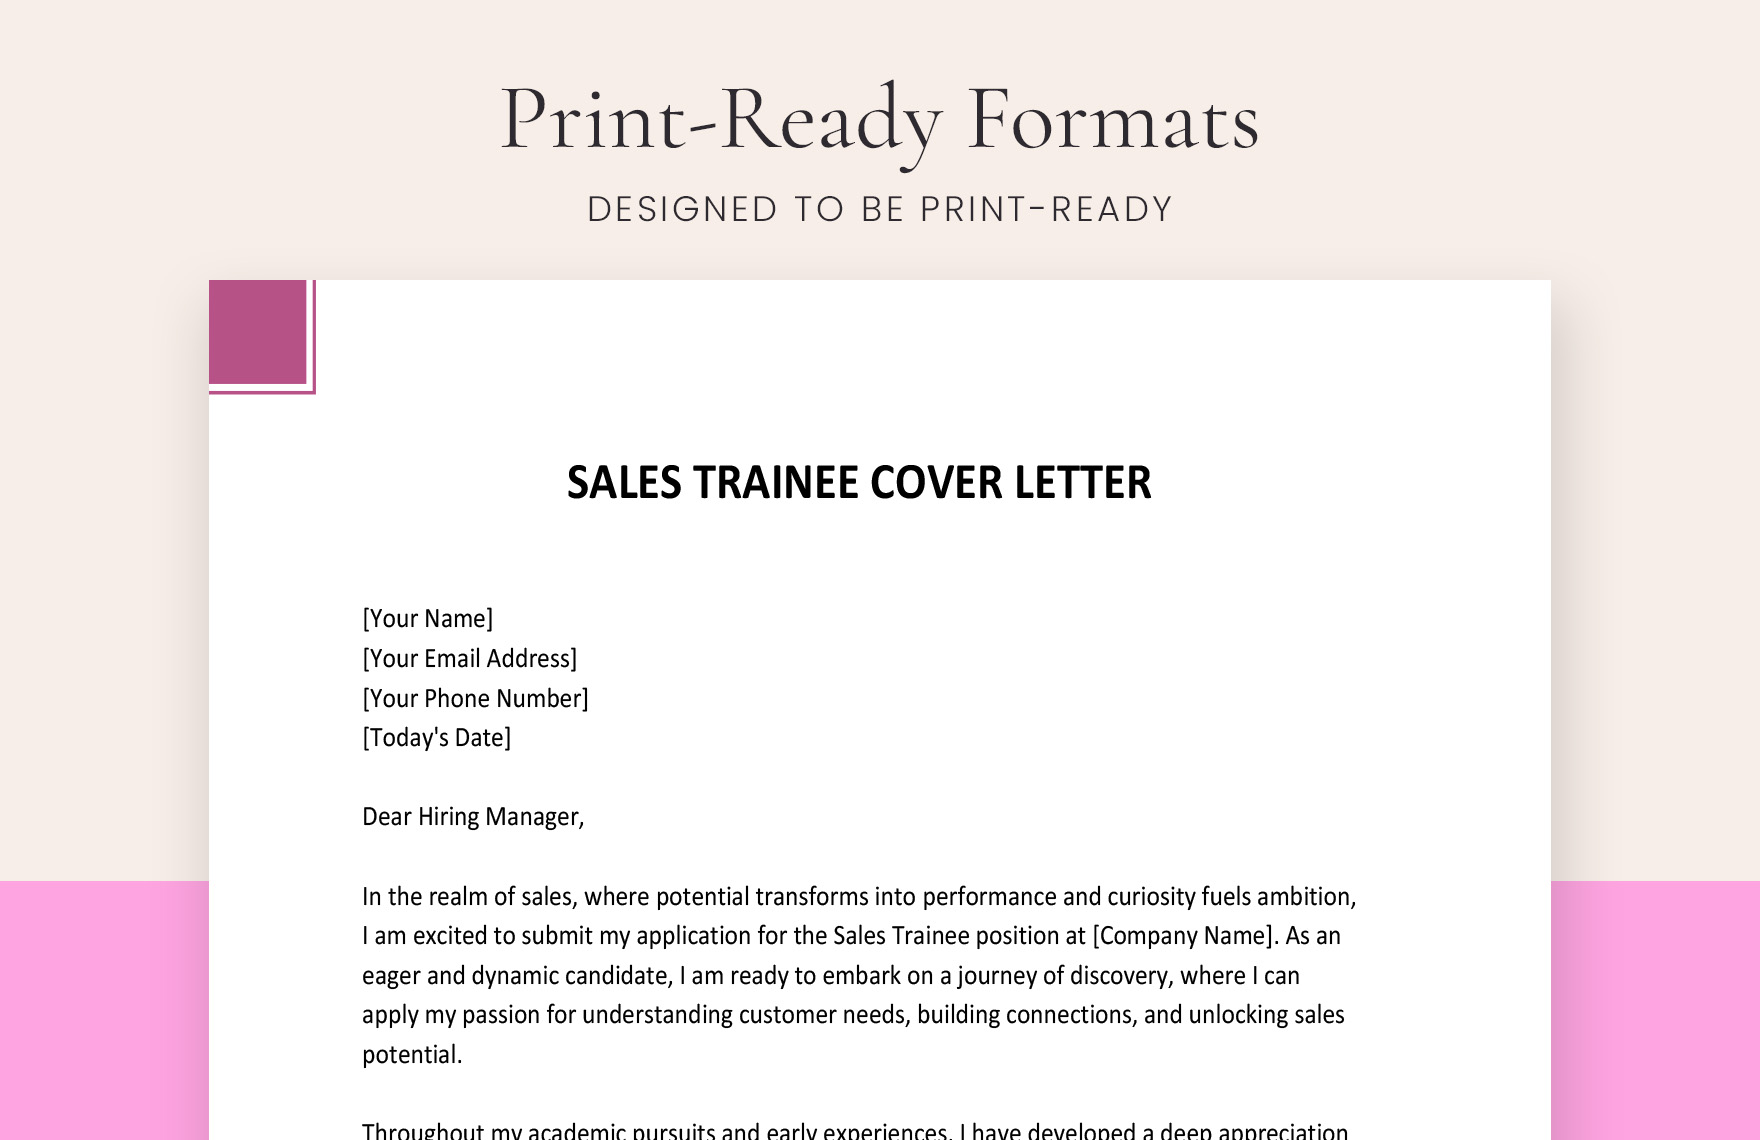 Sales Trainee Cover Letter